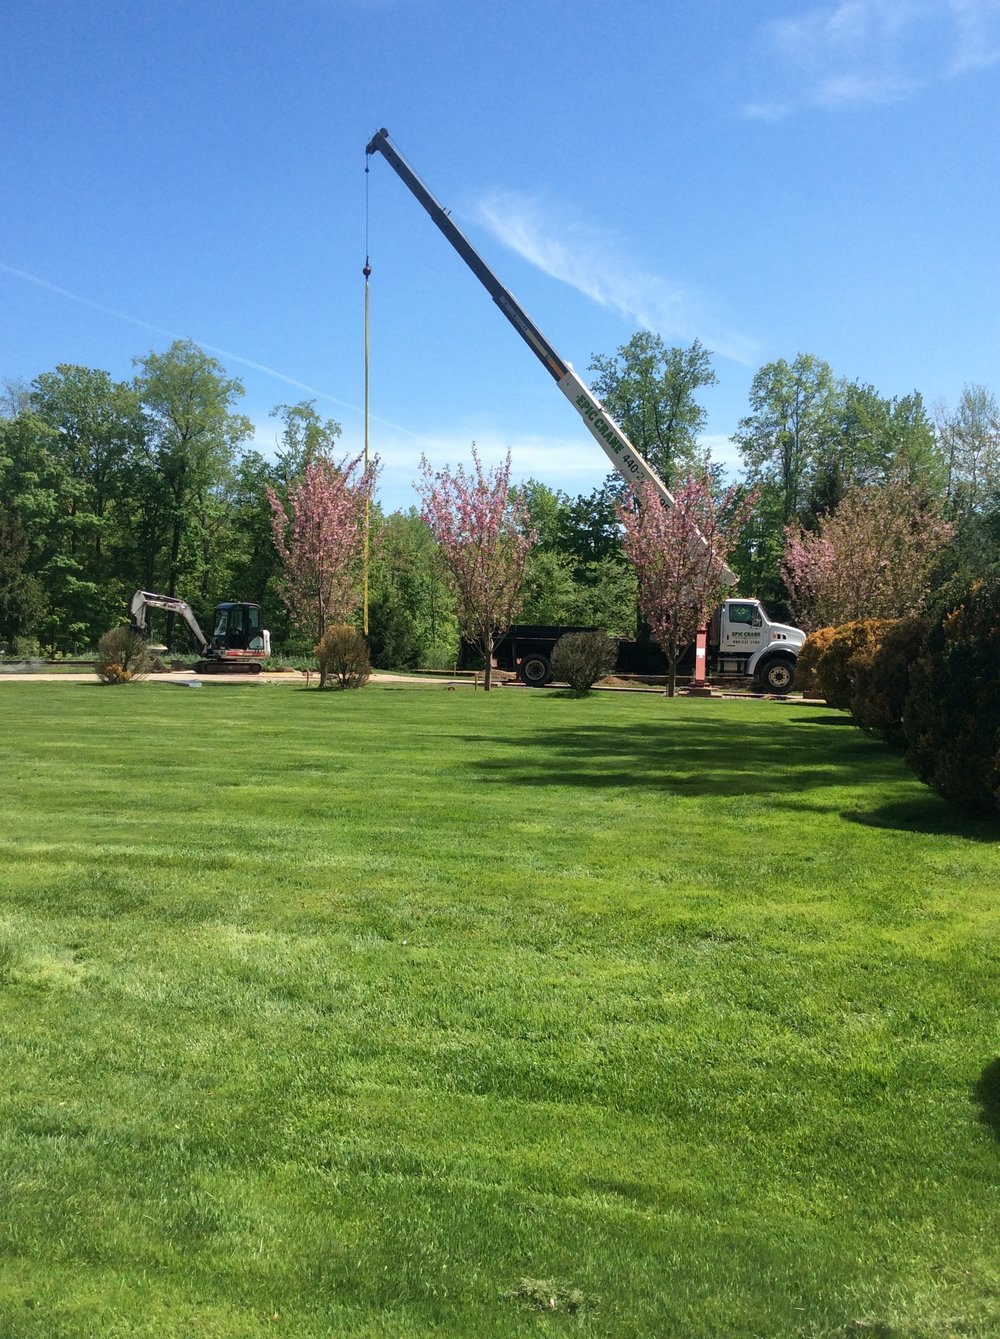 Top lawn care and snow removal in Bainbridge Township, OH